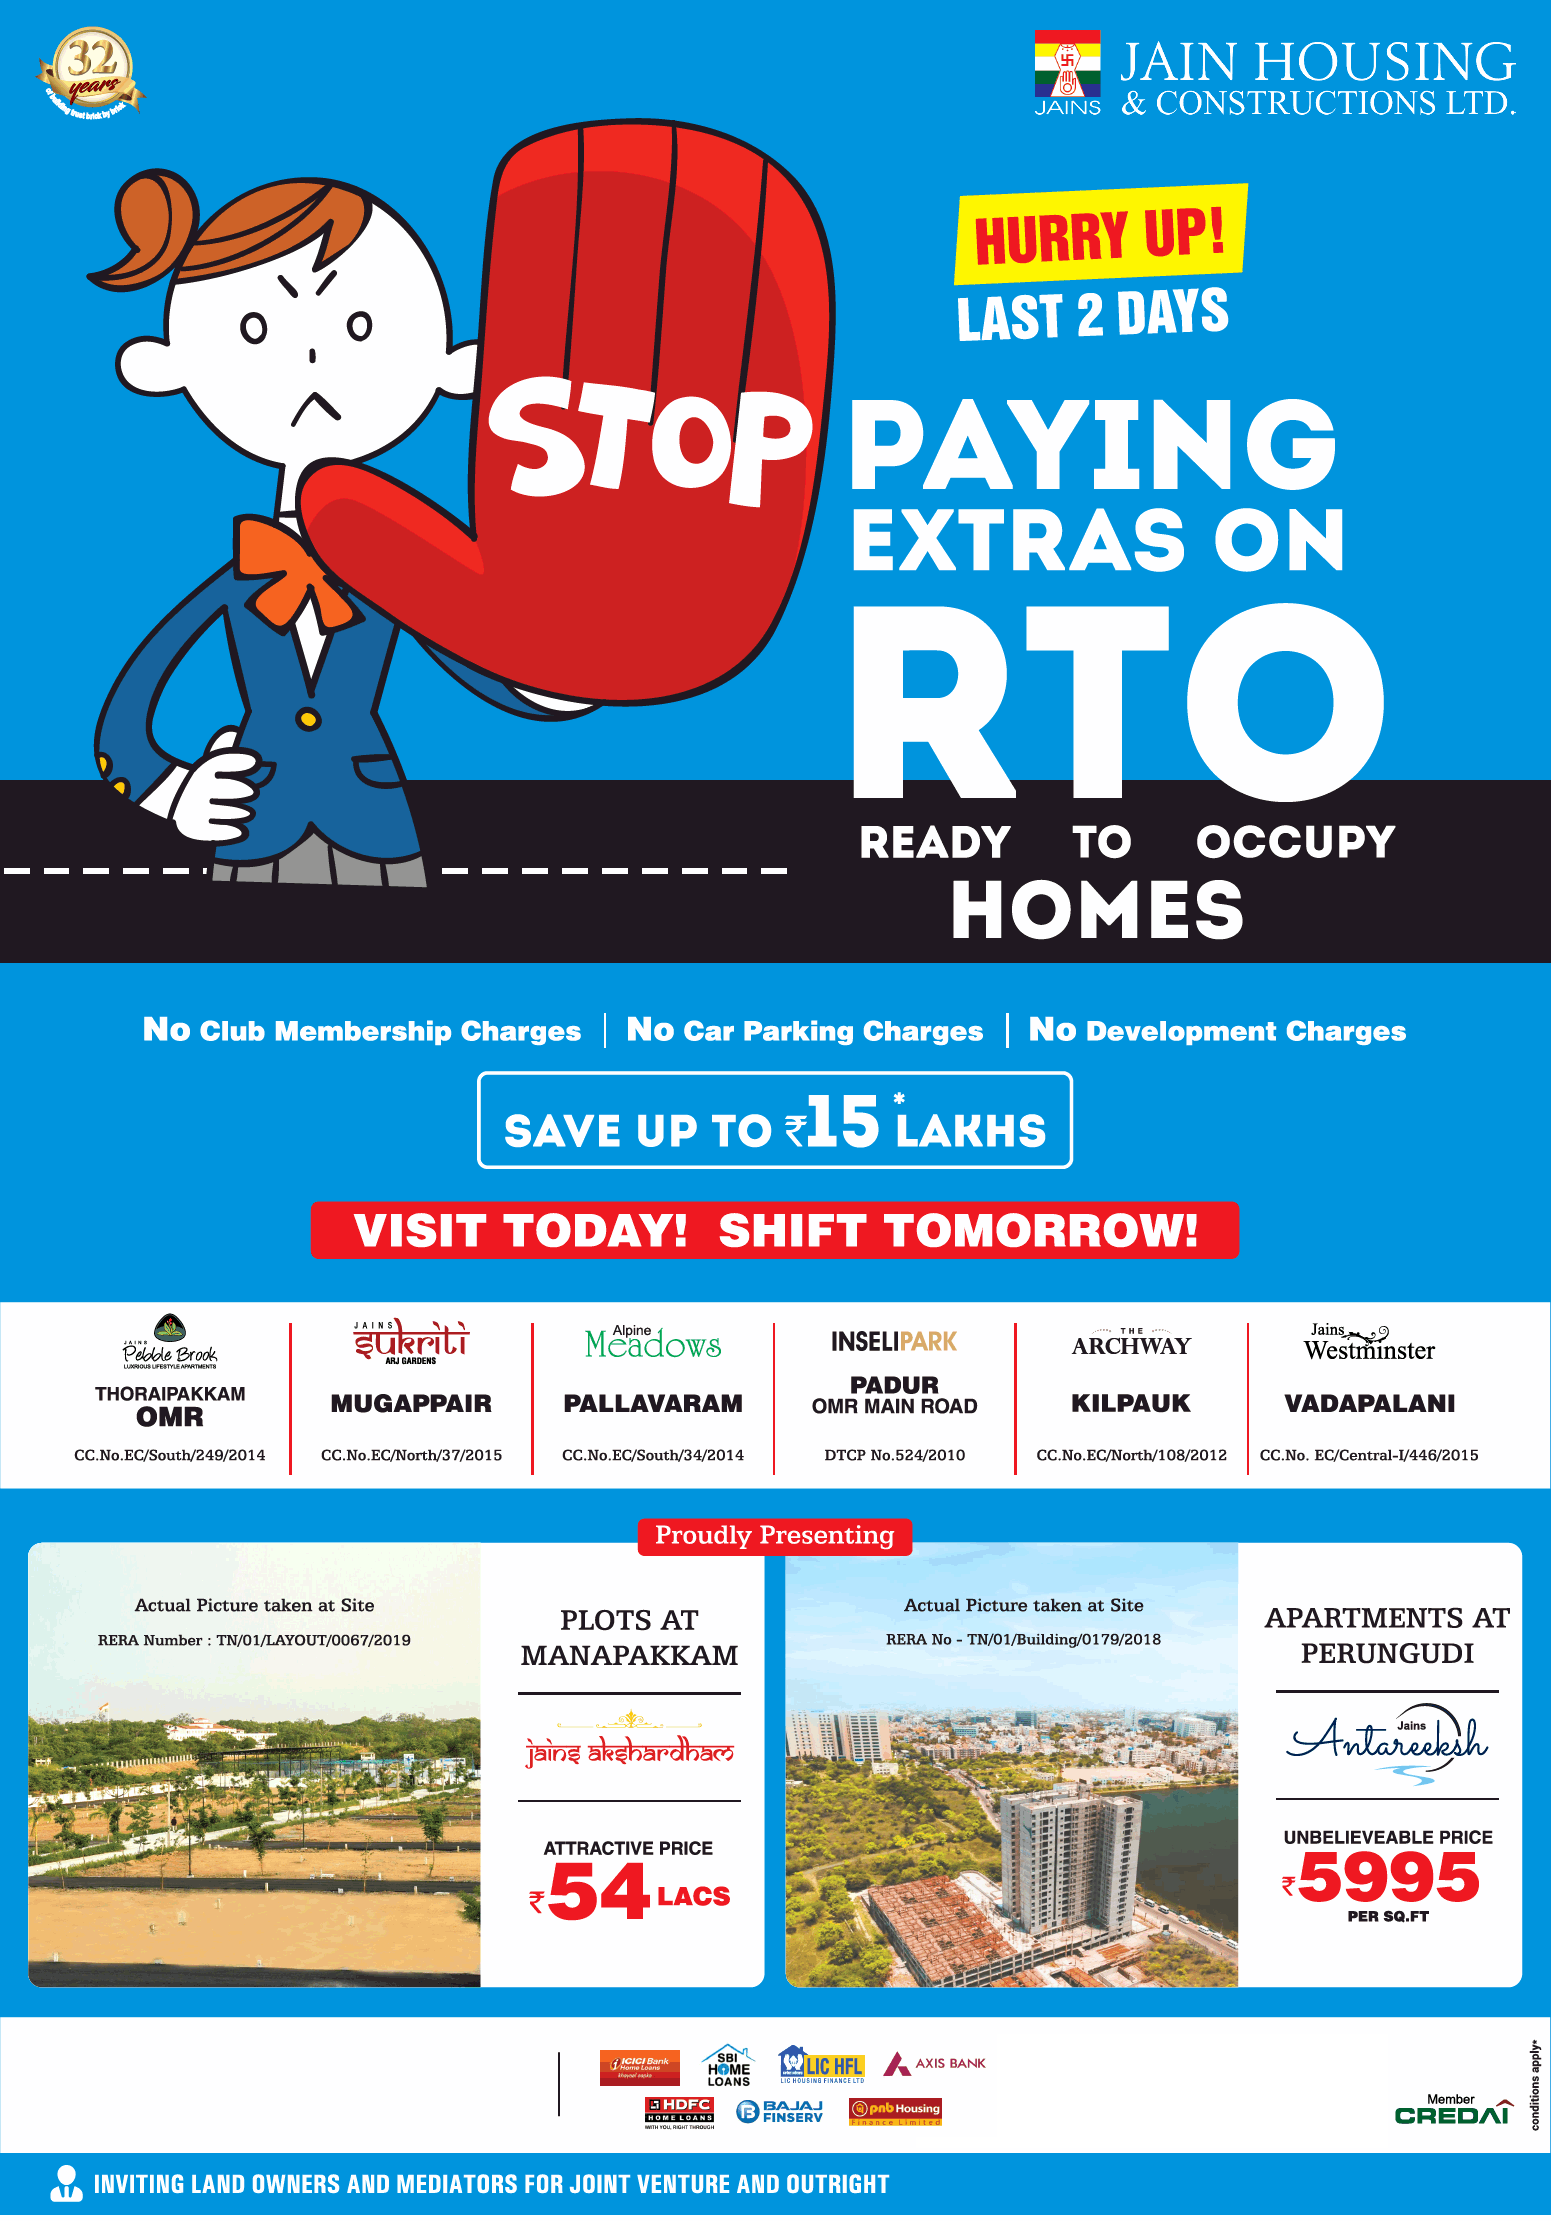 Jain Housing Hurry up! last 2 days stop paying extras on RTO ready to occupy homes in Chennai Update